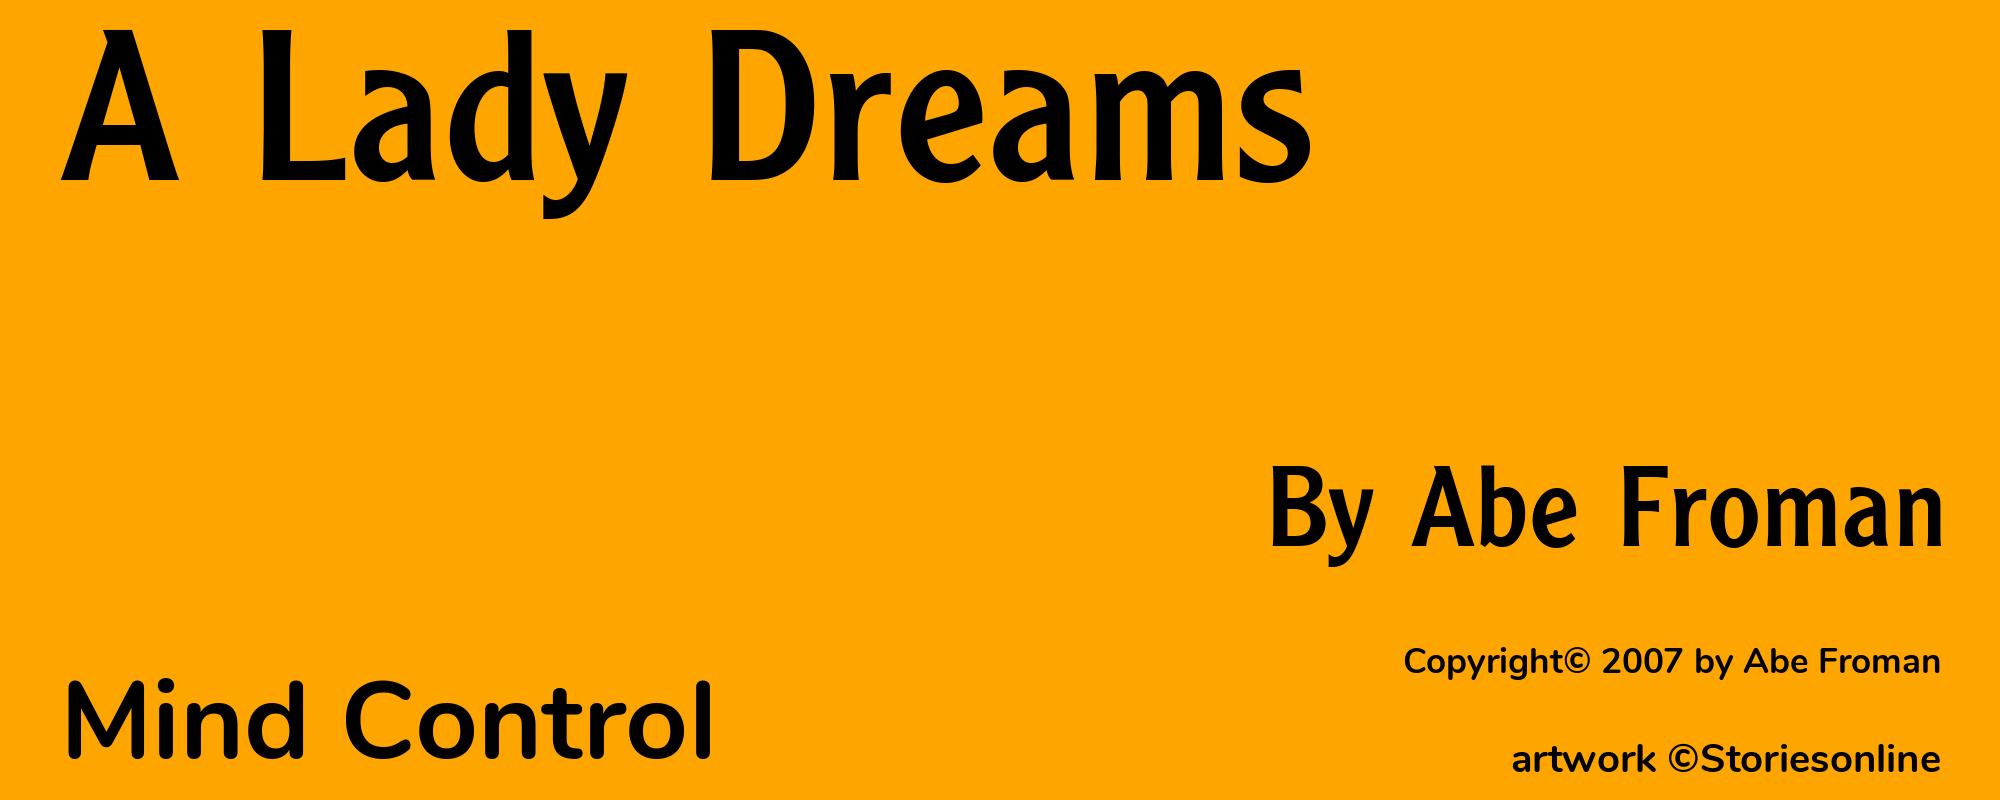 A Lady Dreams - Cover